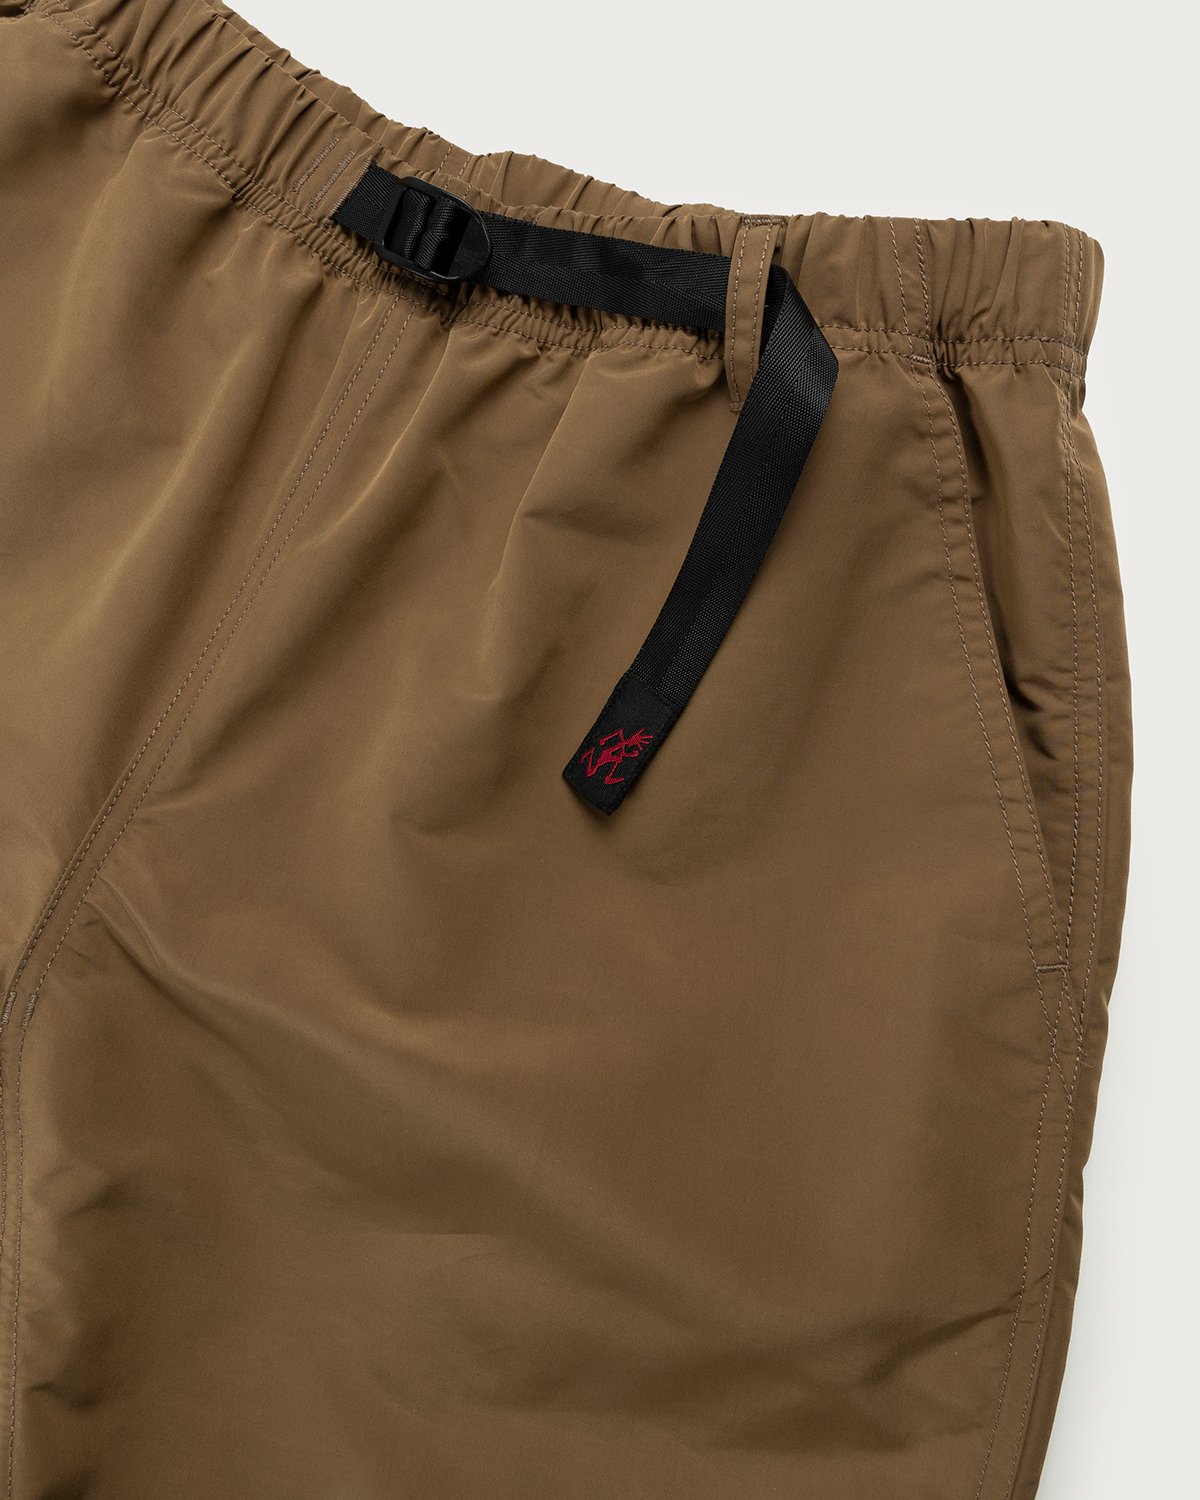 Gramicci x Highsnobiety - HS Sports Shell Packable Shorts Tan - Clothing - Brown - Image 4